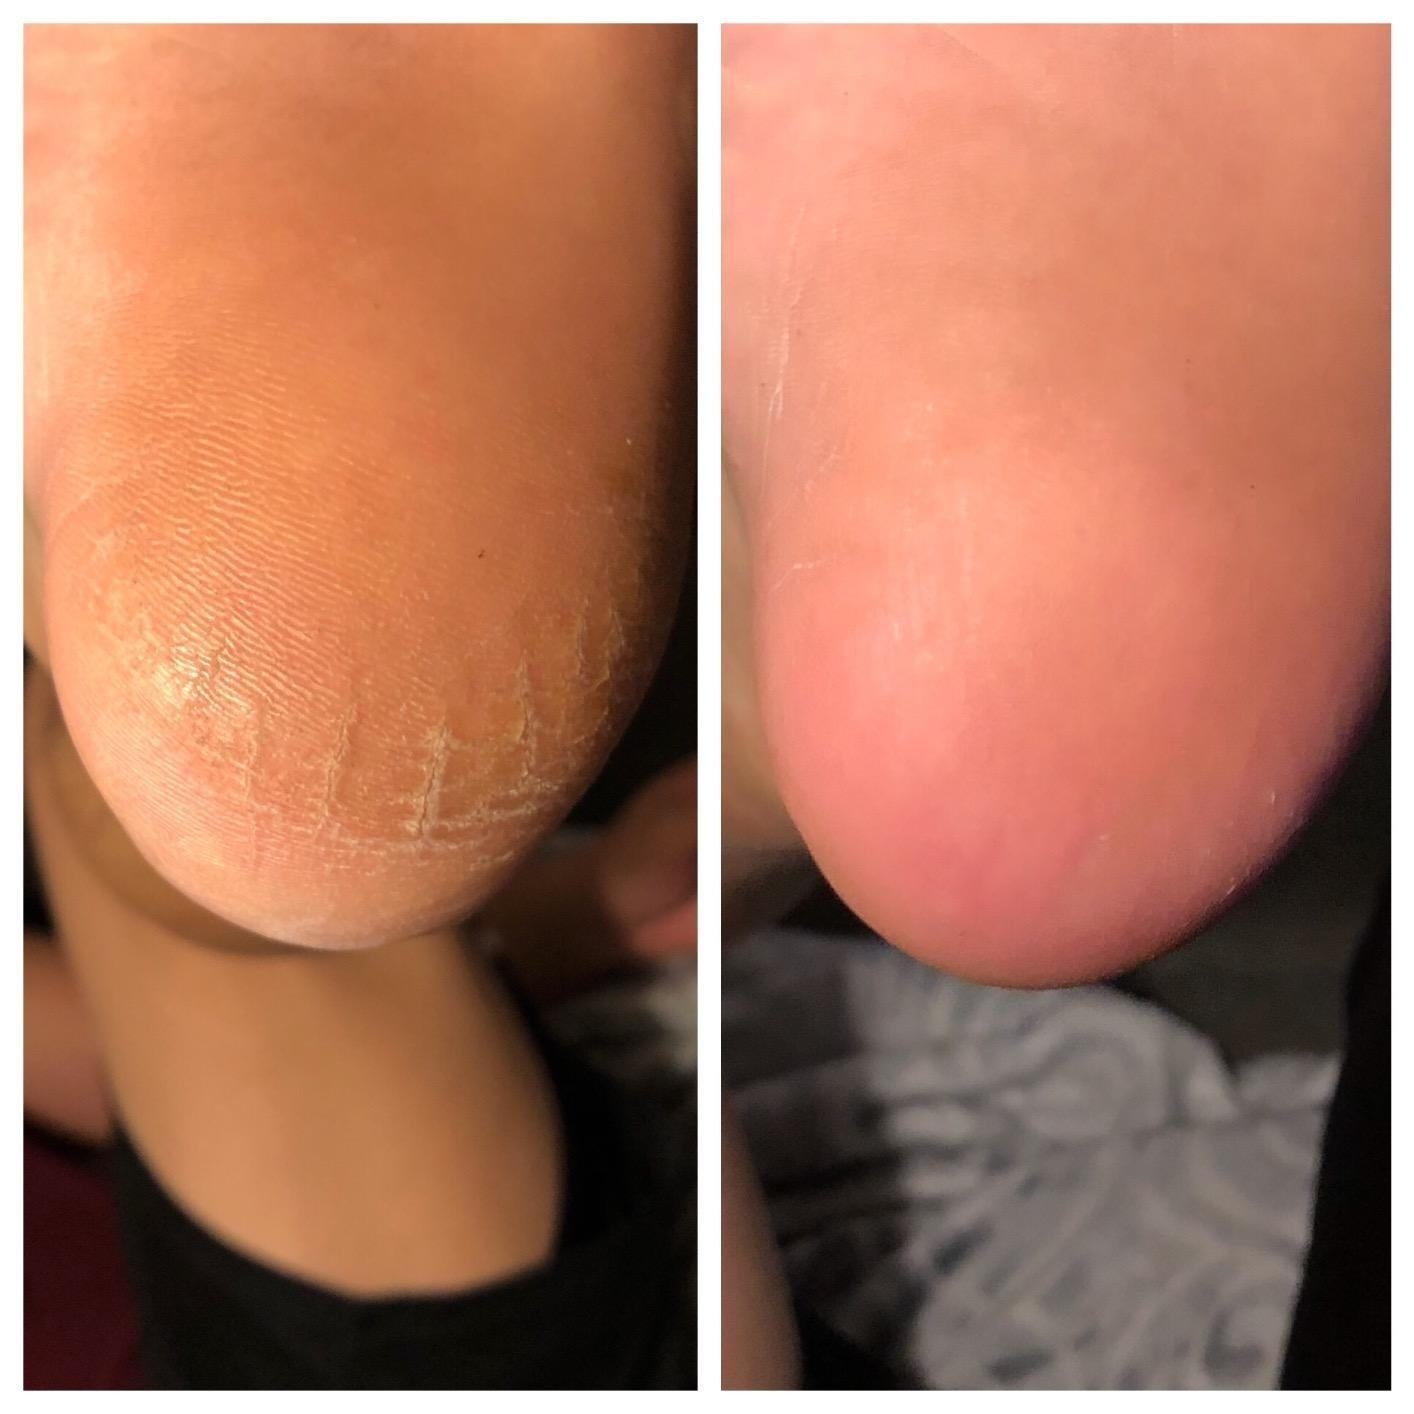 reviewer photo of a cracked heel and an after photo of the same heel smooth after using the file